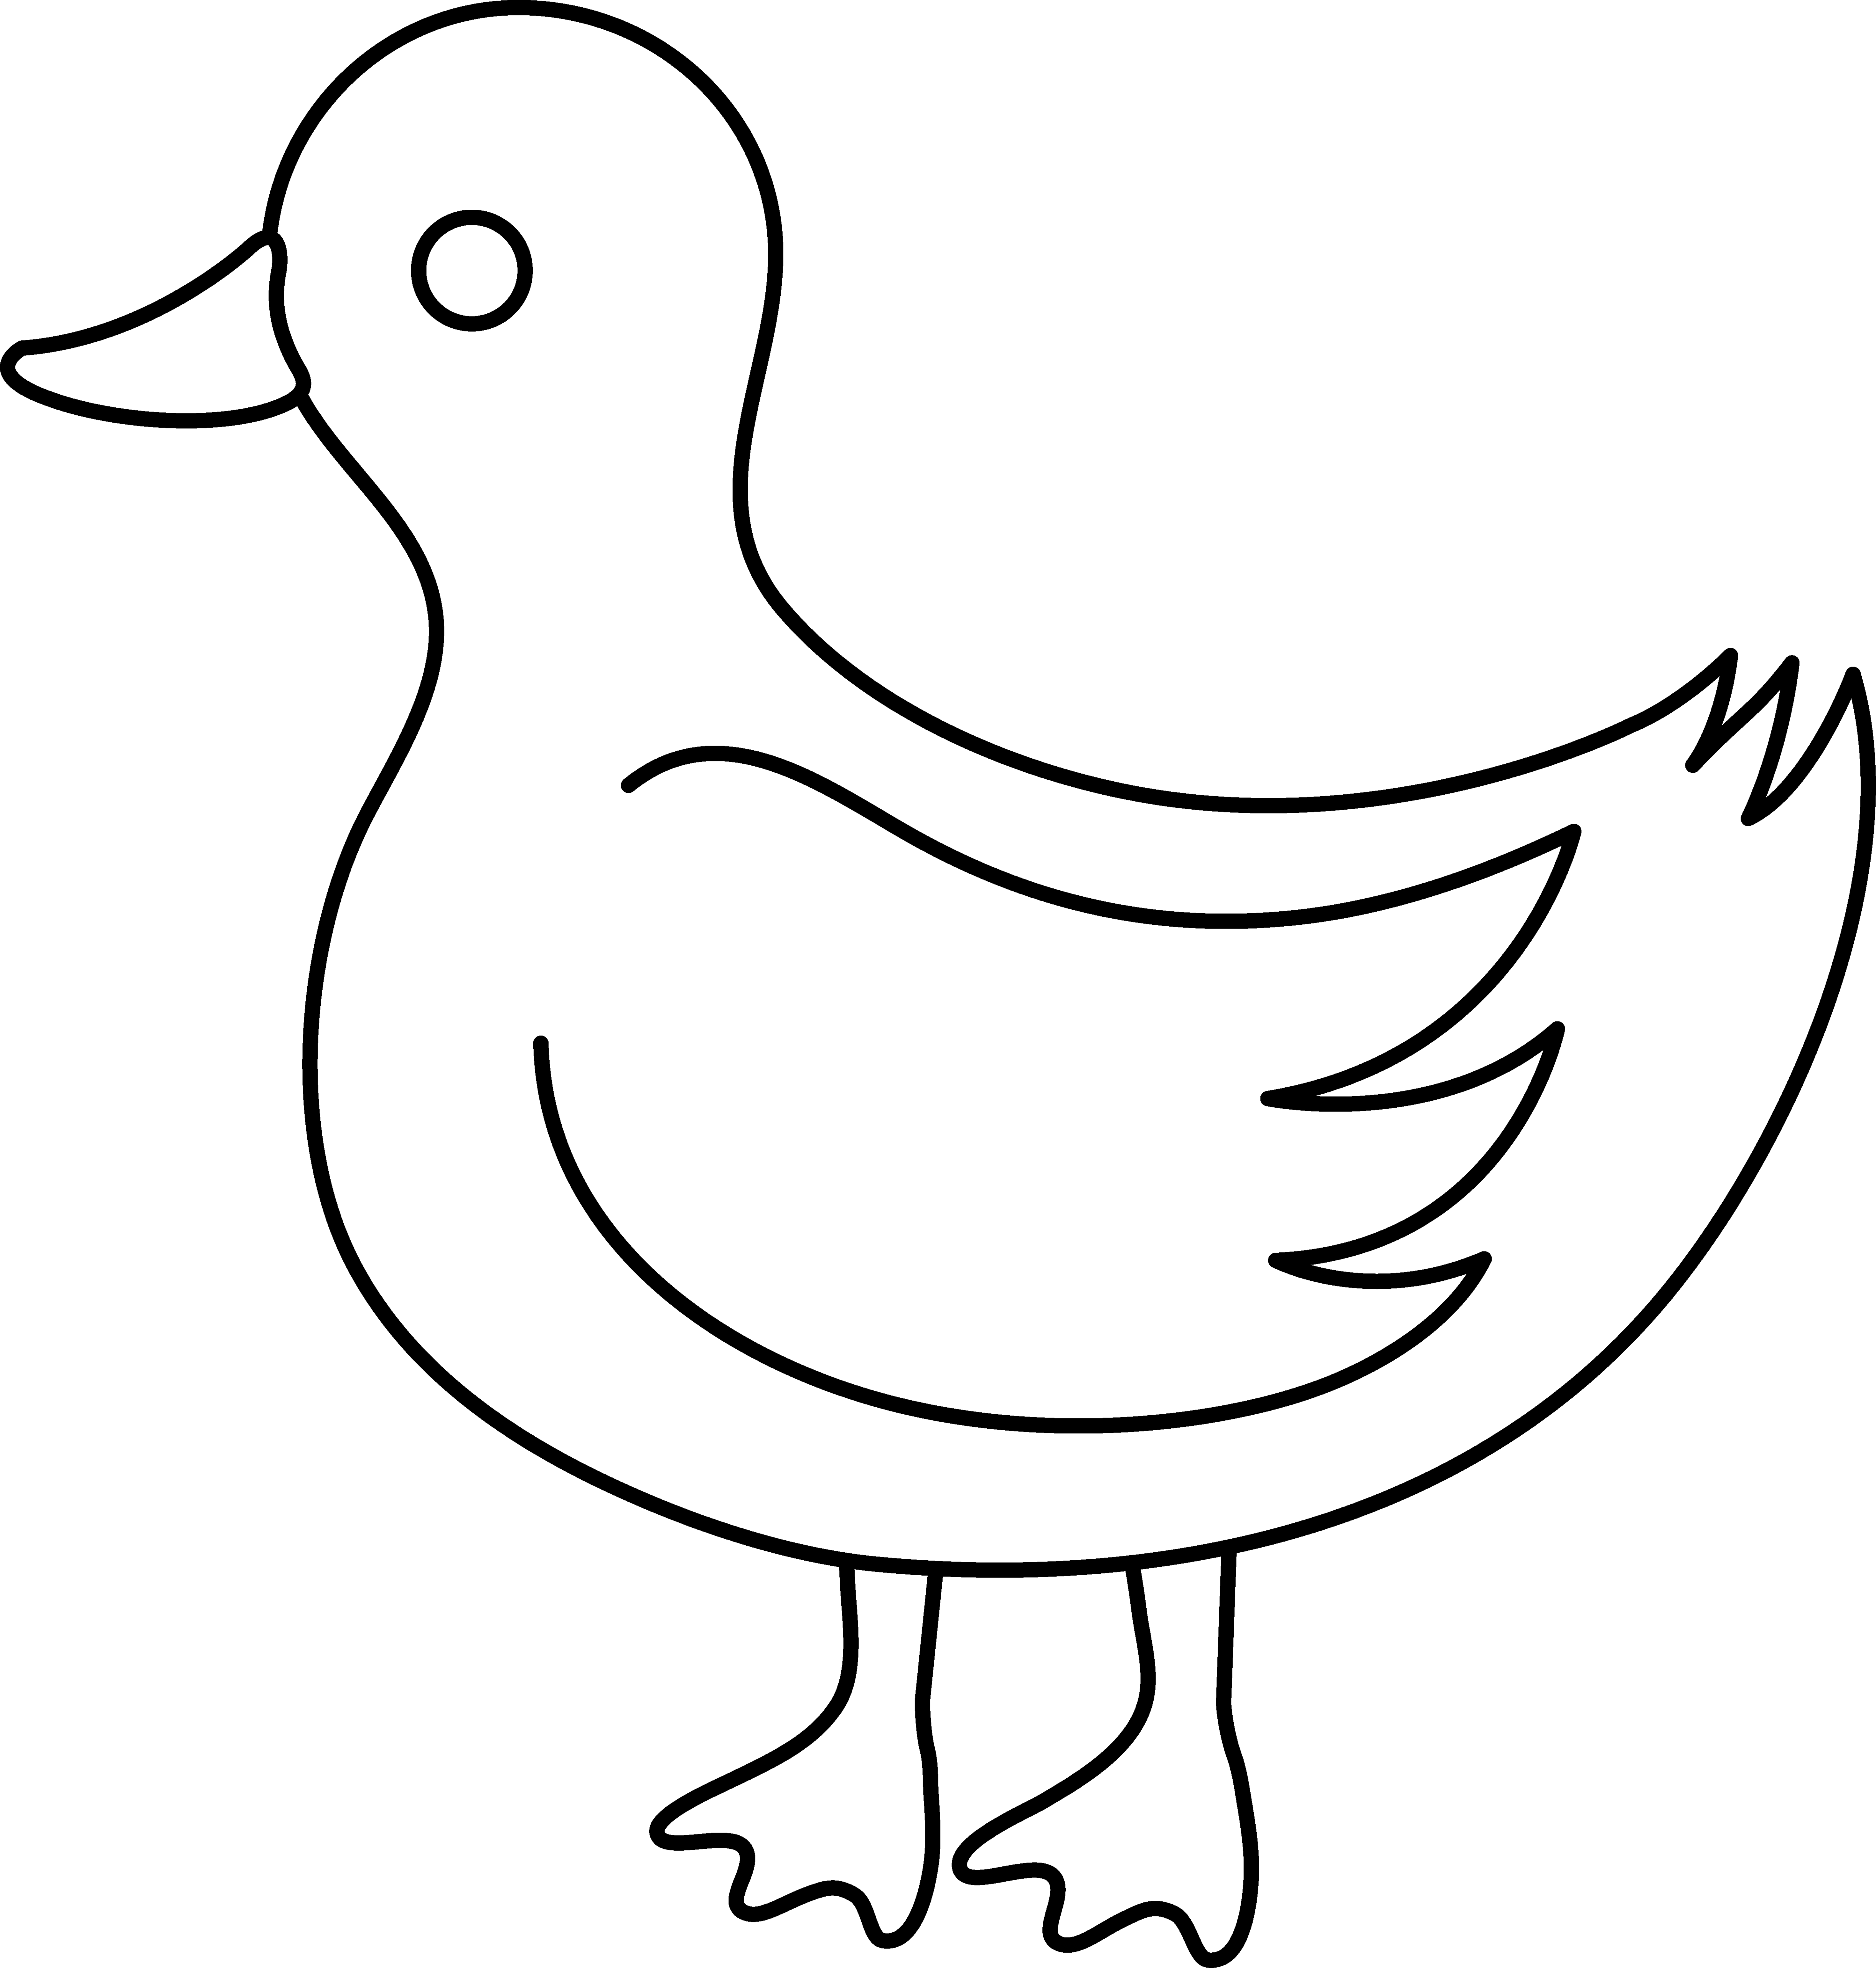 1 clipart duck. Duckling black and white